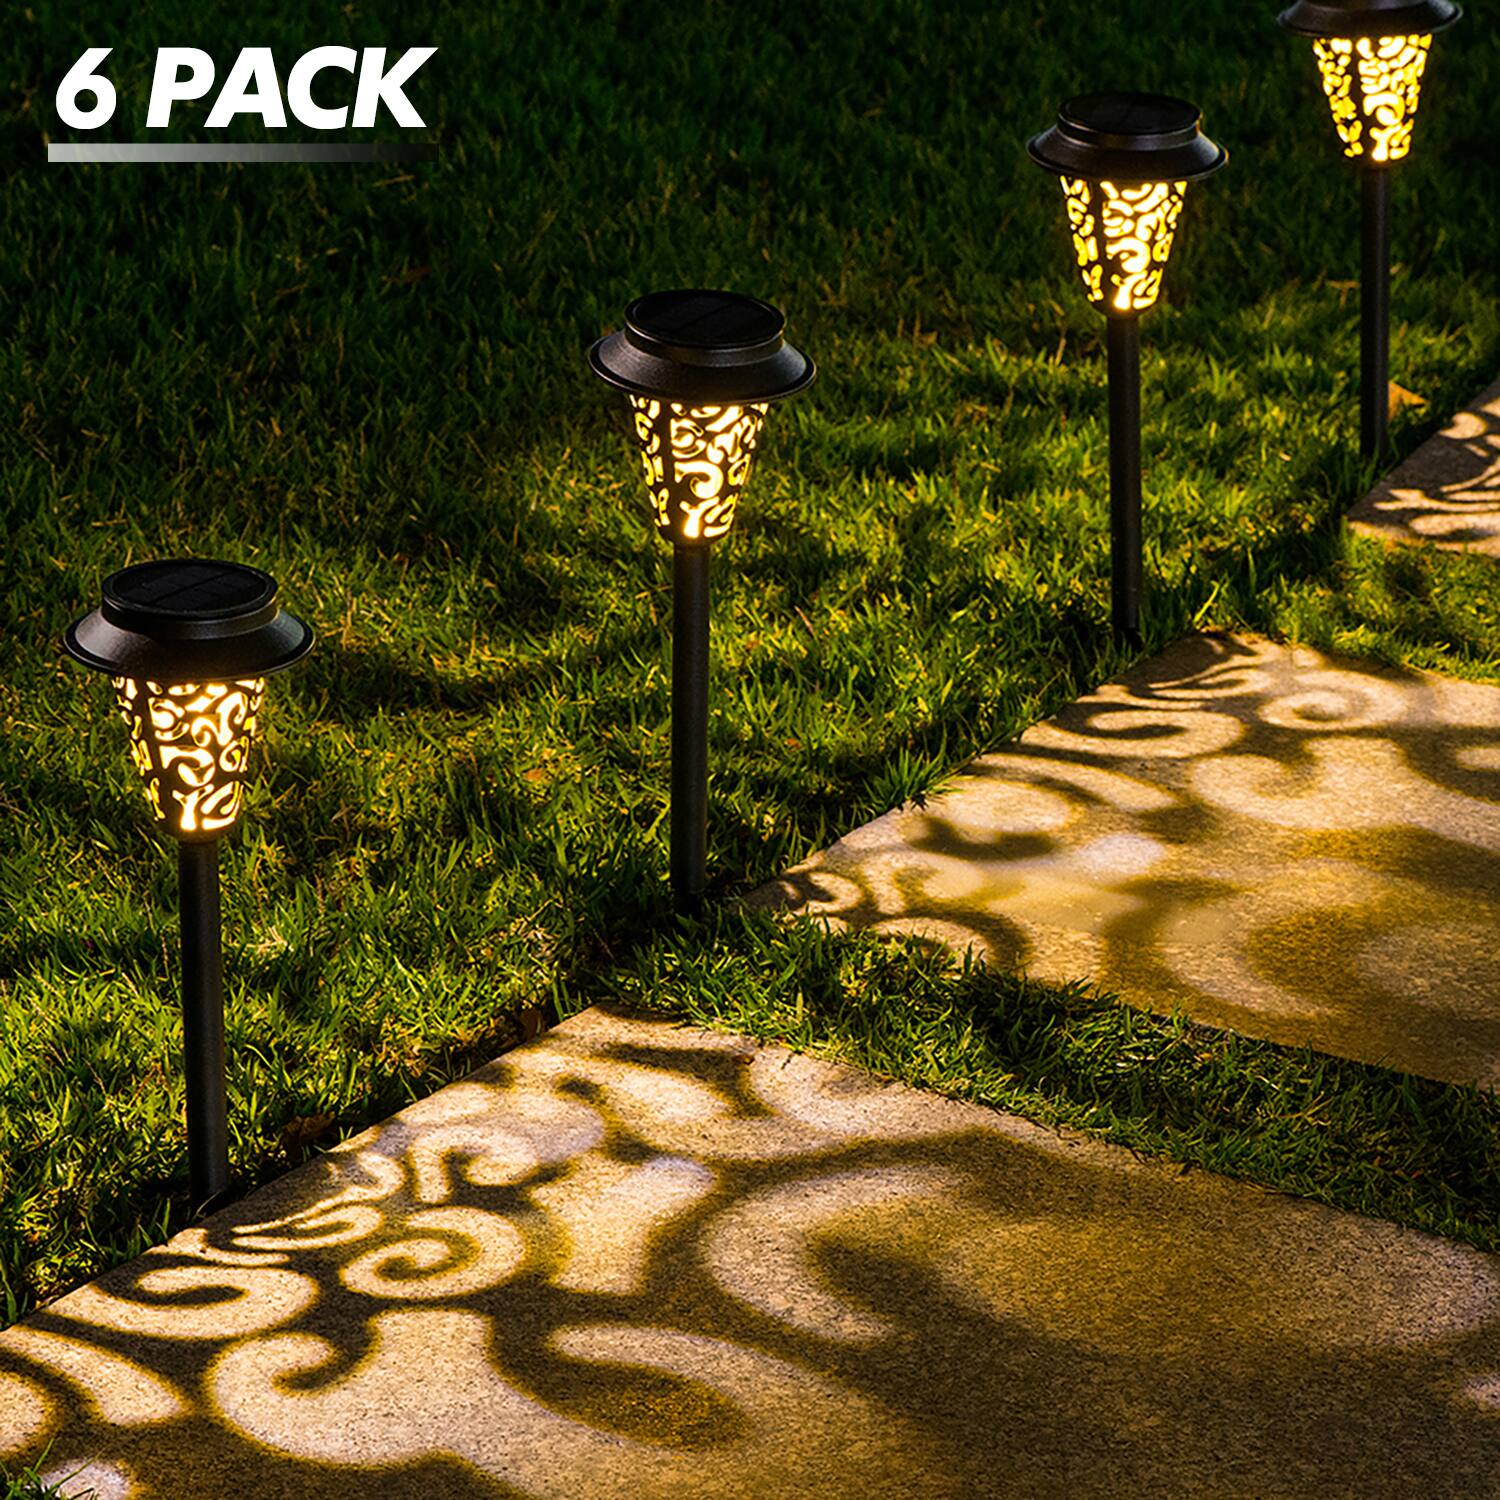 LeiDrail 6 Pack Waterproof Metal Solar Pathway Lights for $25.19 + Free Shipping